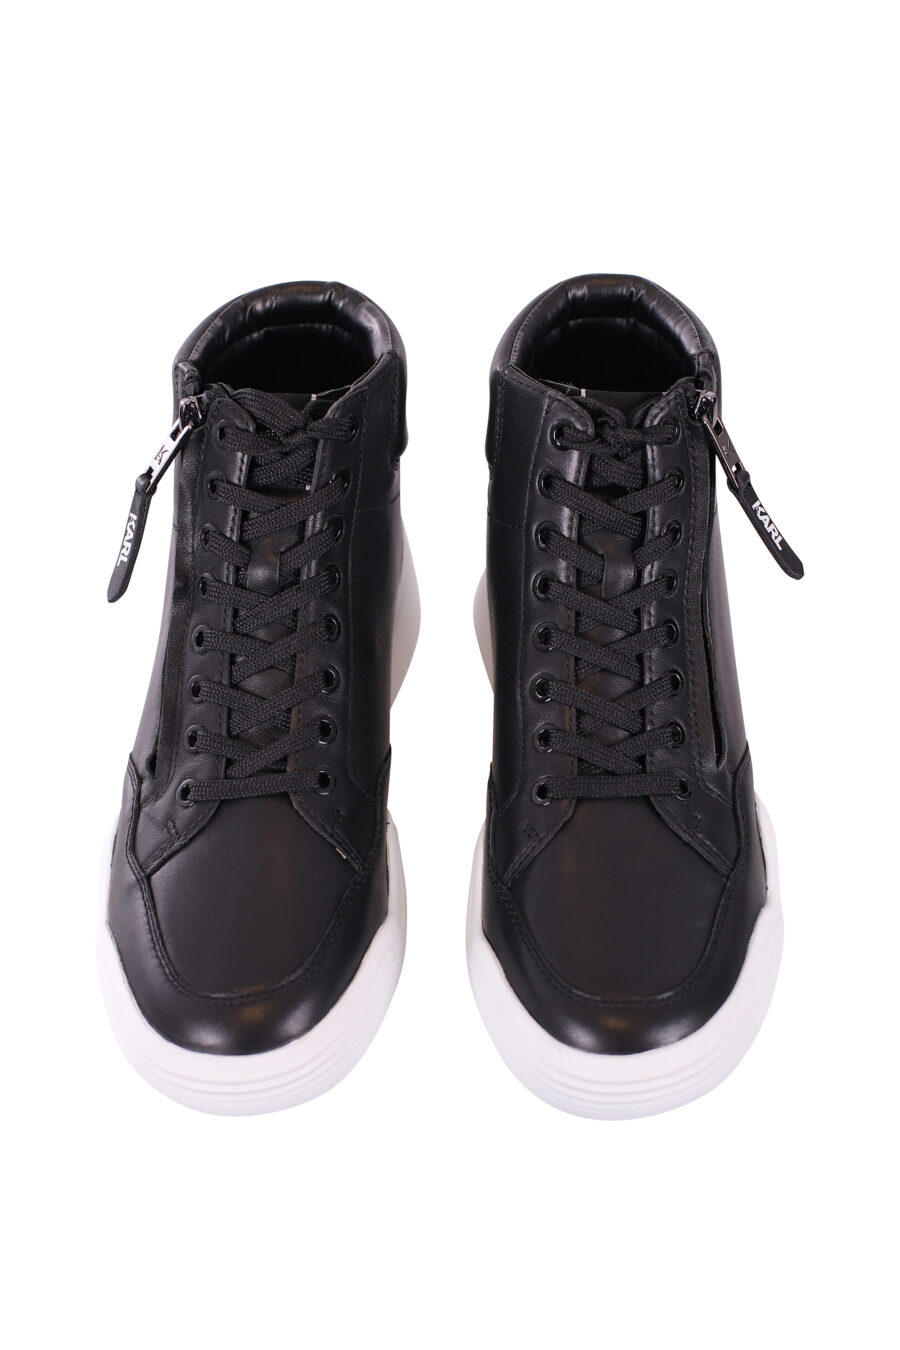 Black high top trainers with white sole and laces - IMG 5683